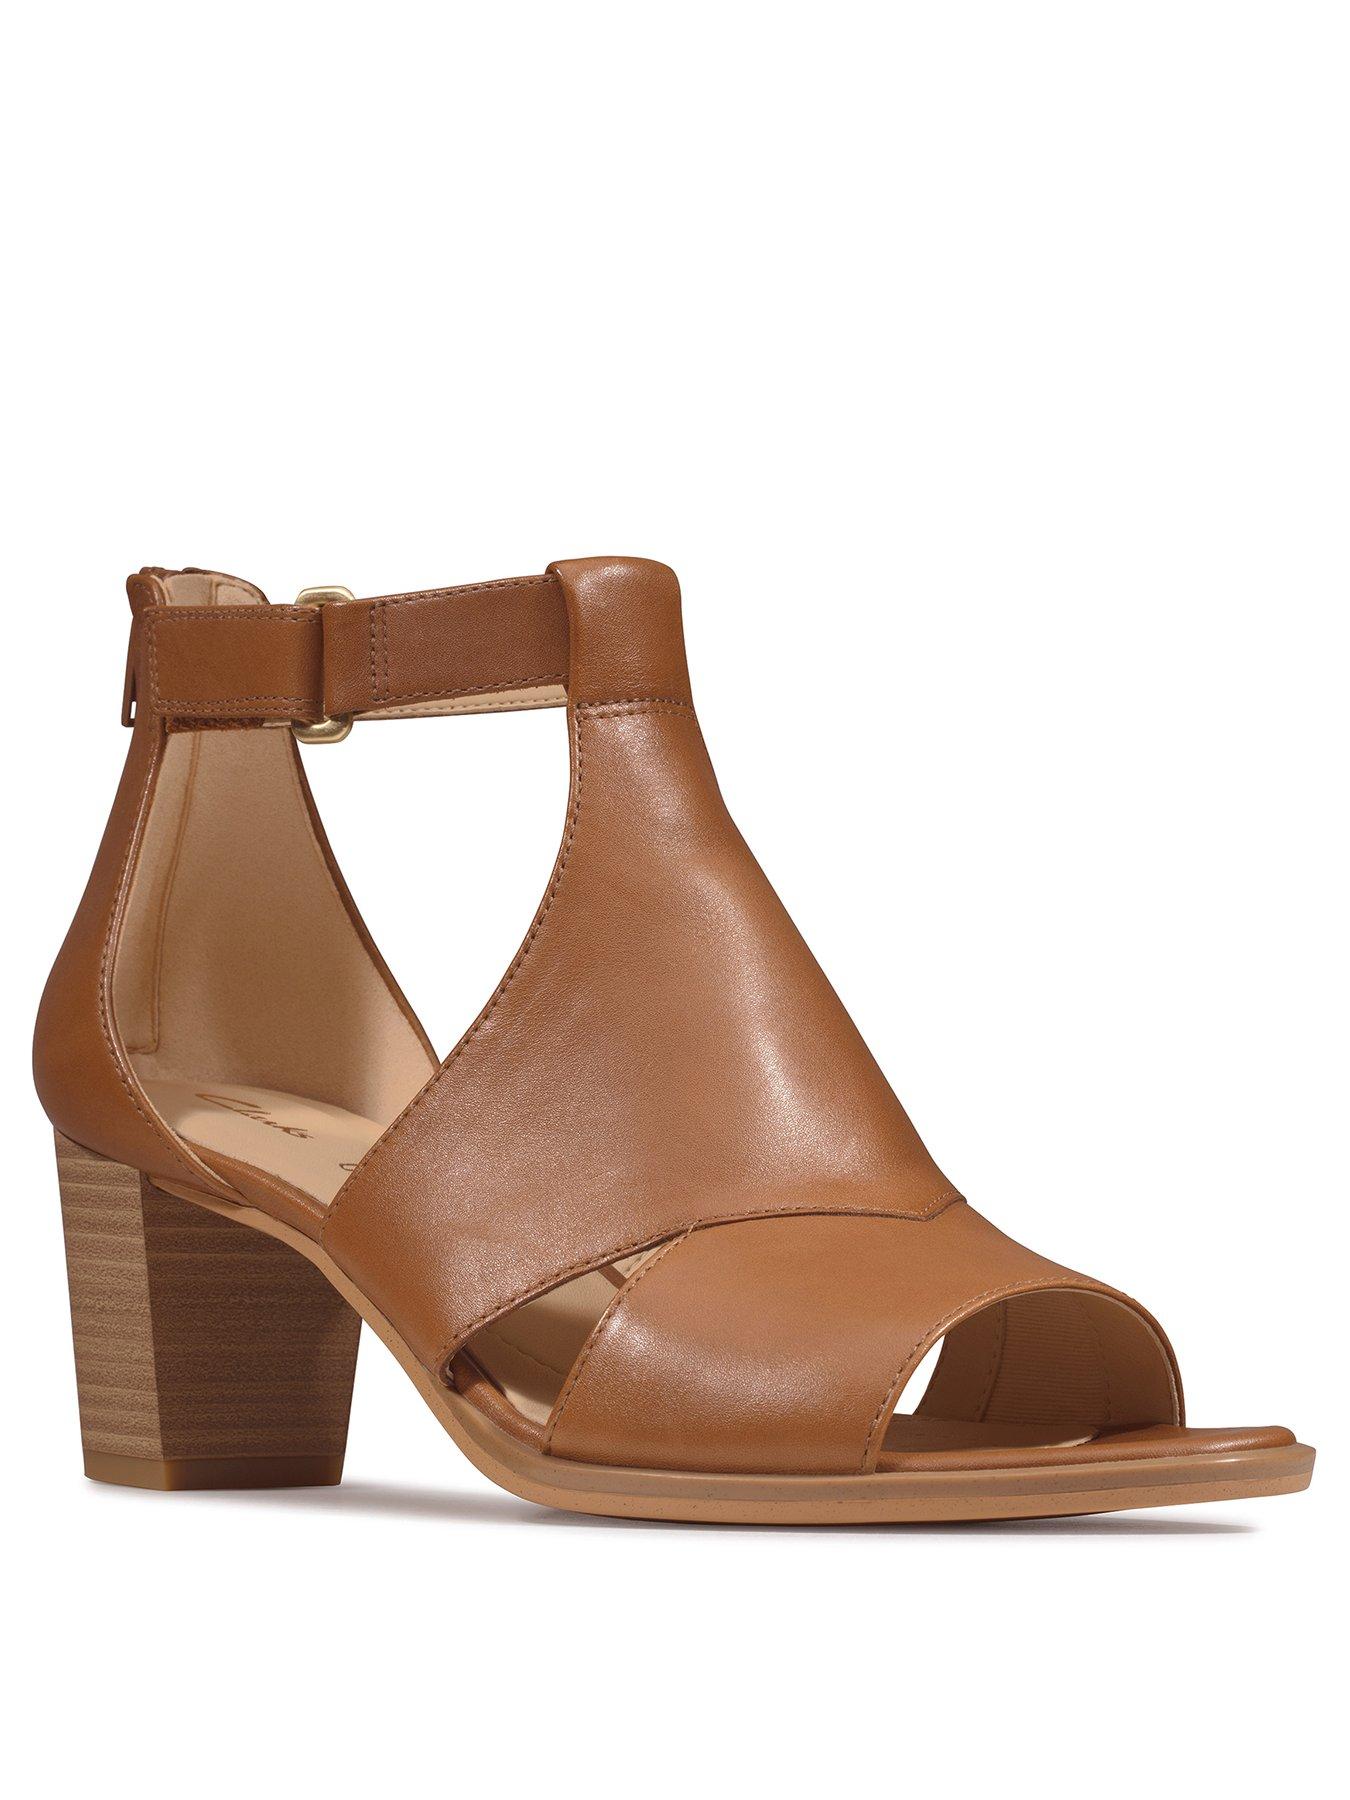 clarks tan leather sandals